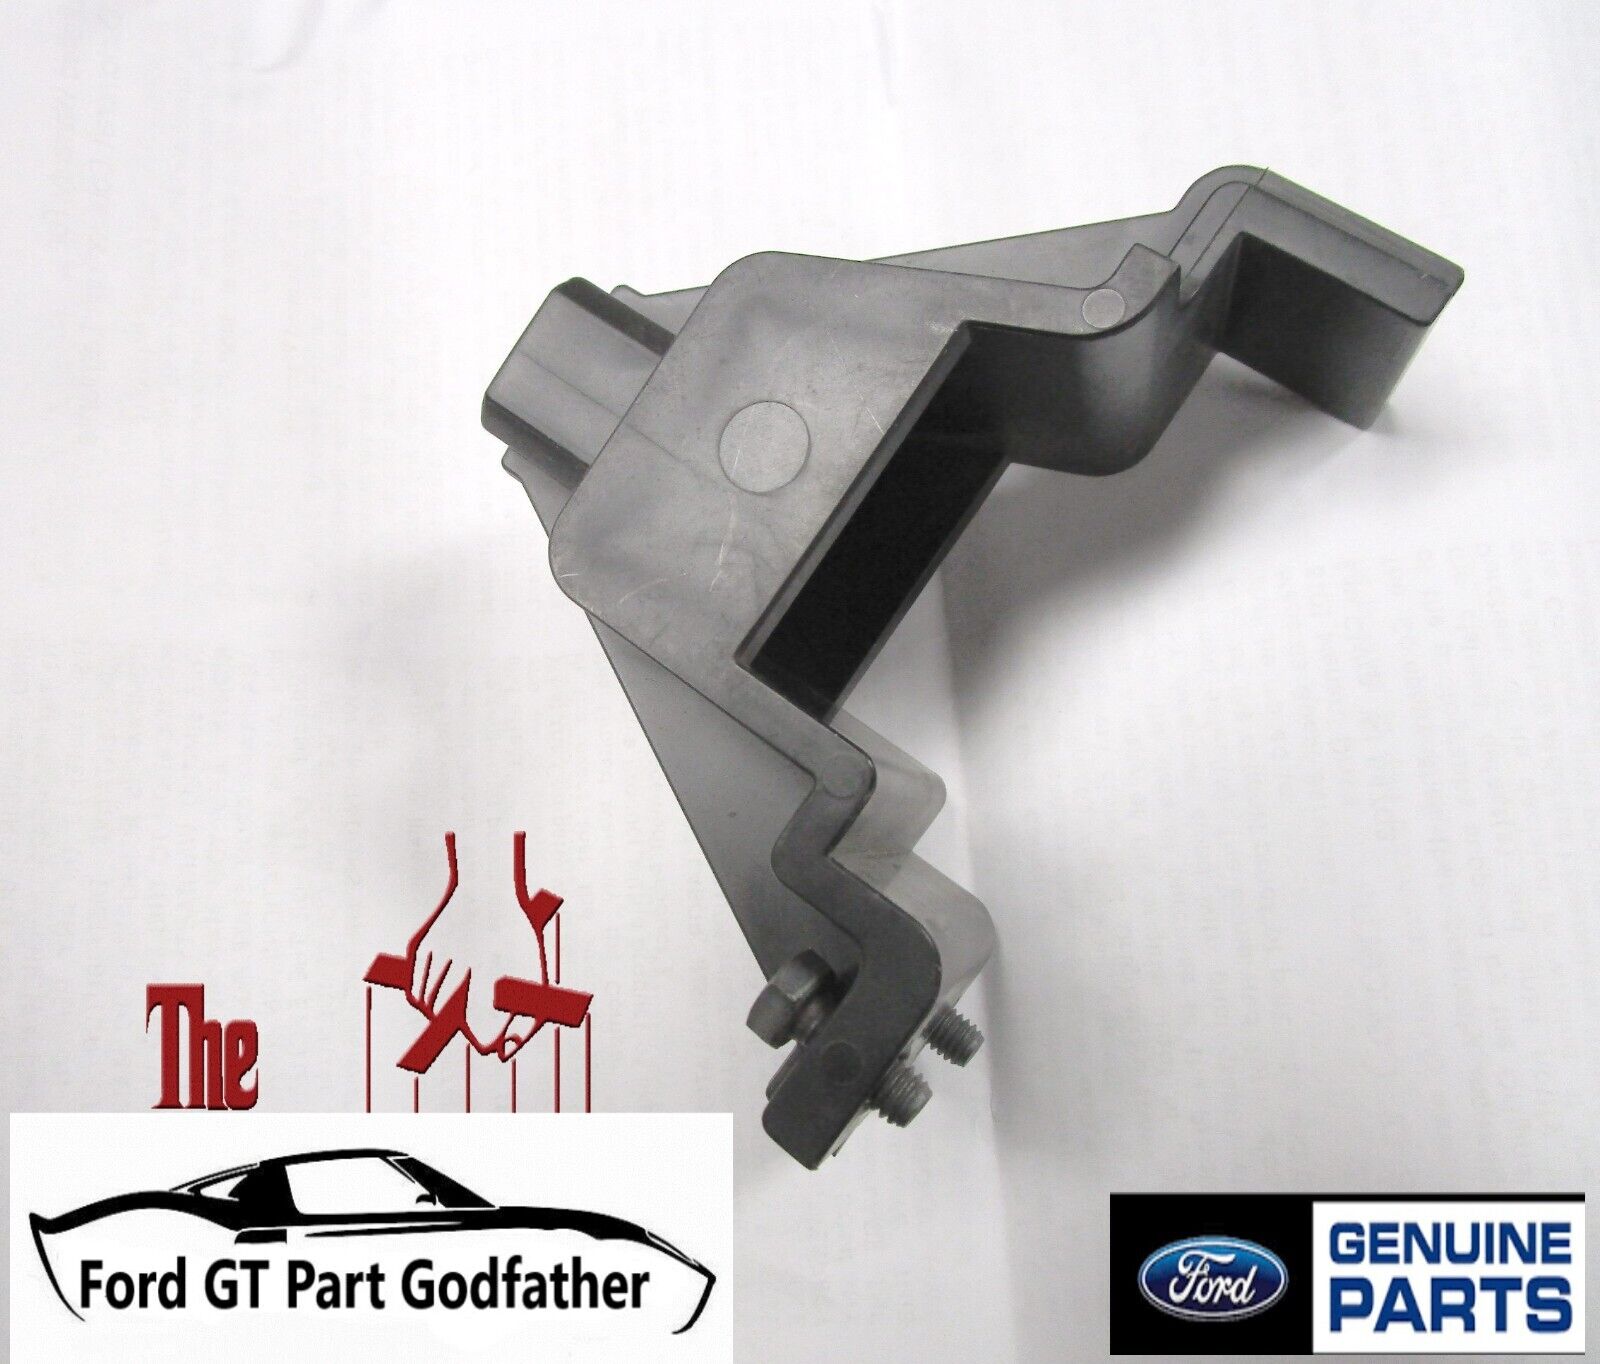 2005,2006 FORD GT GT40 SUPERCAR FACTORY OEM SHIFTER CABLE ADJUSTER TOOL 05/06